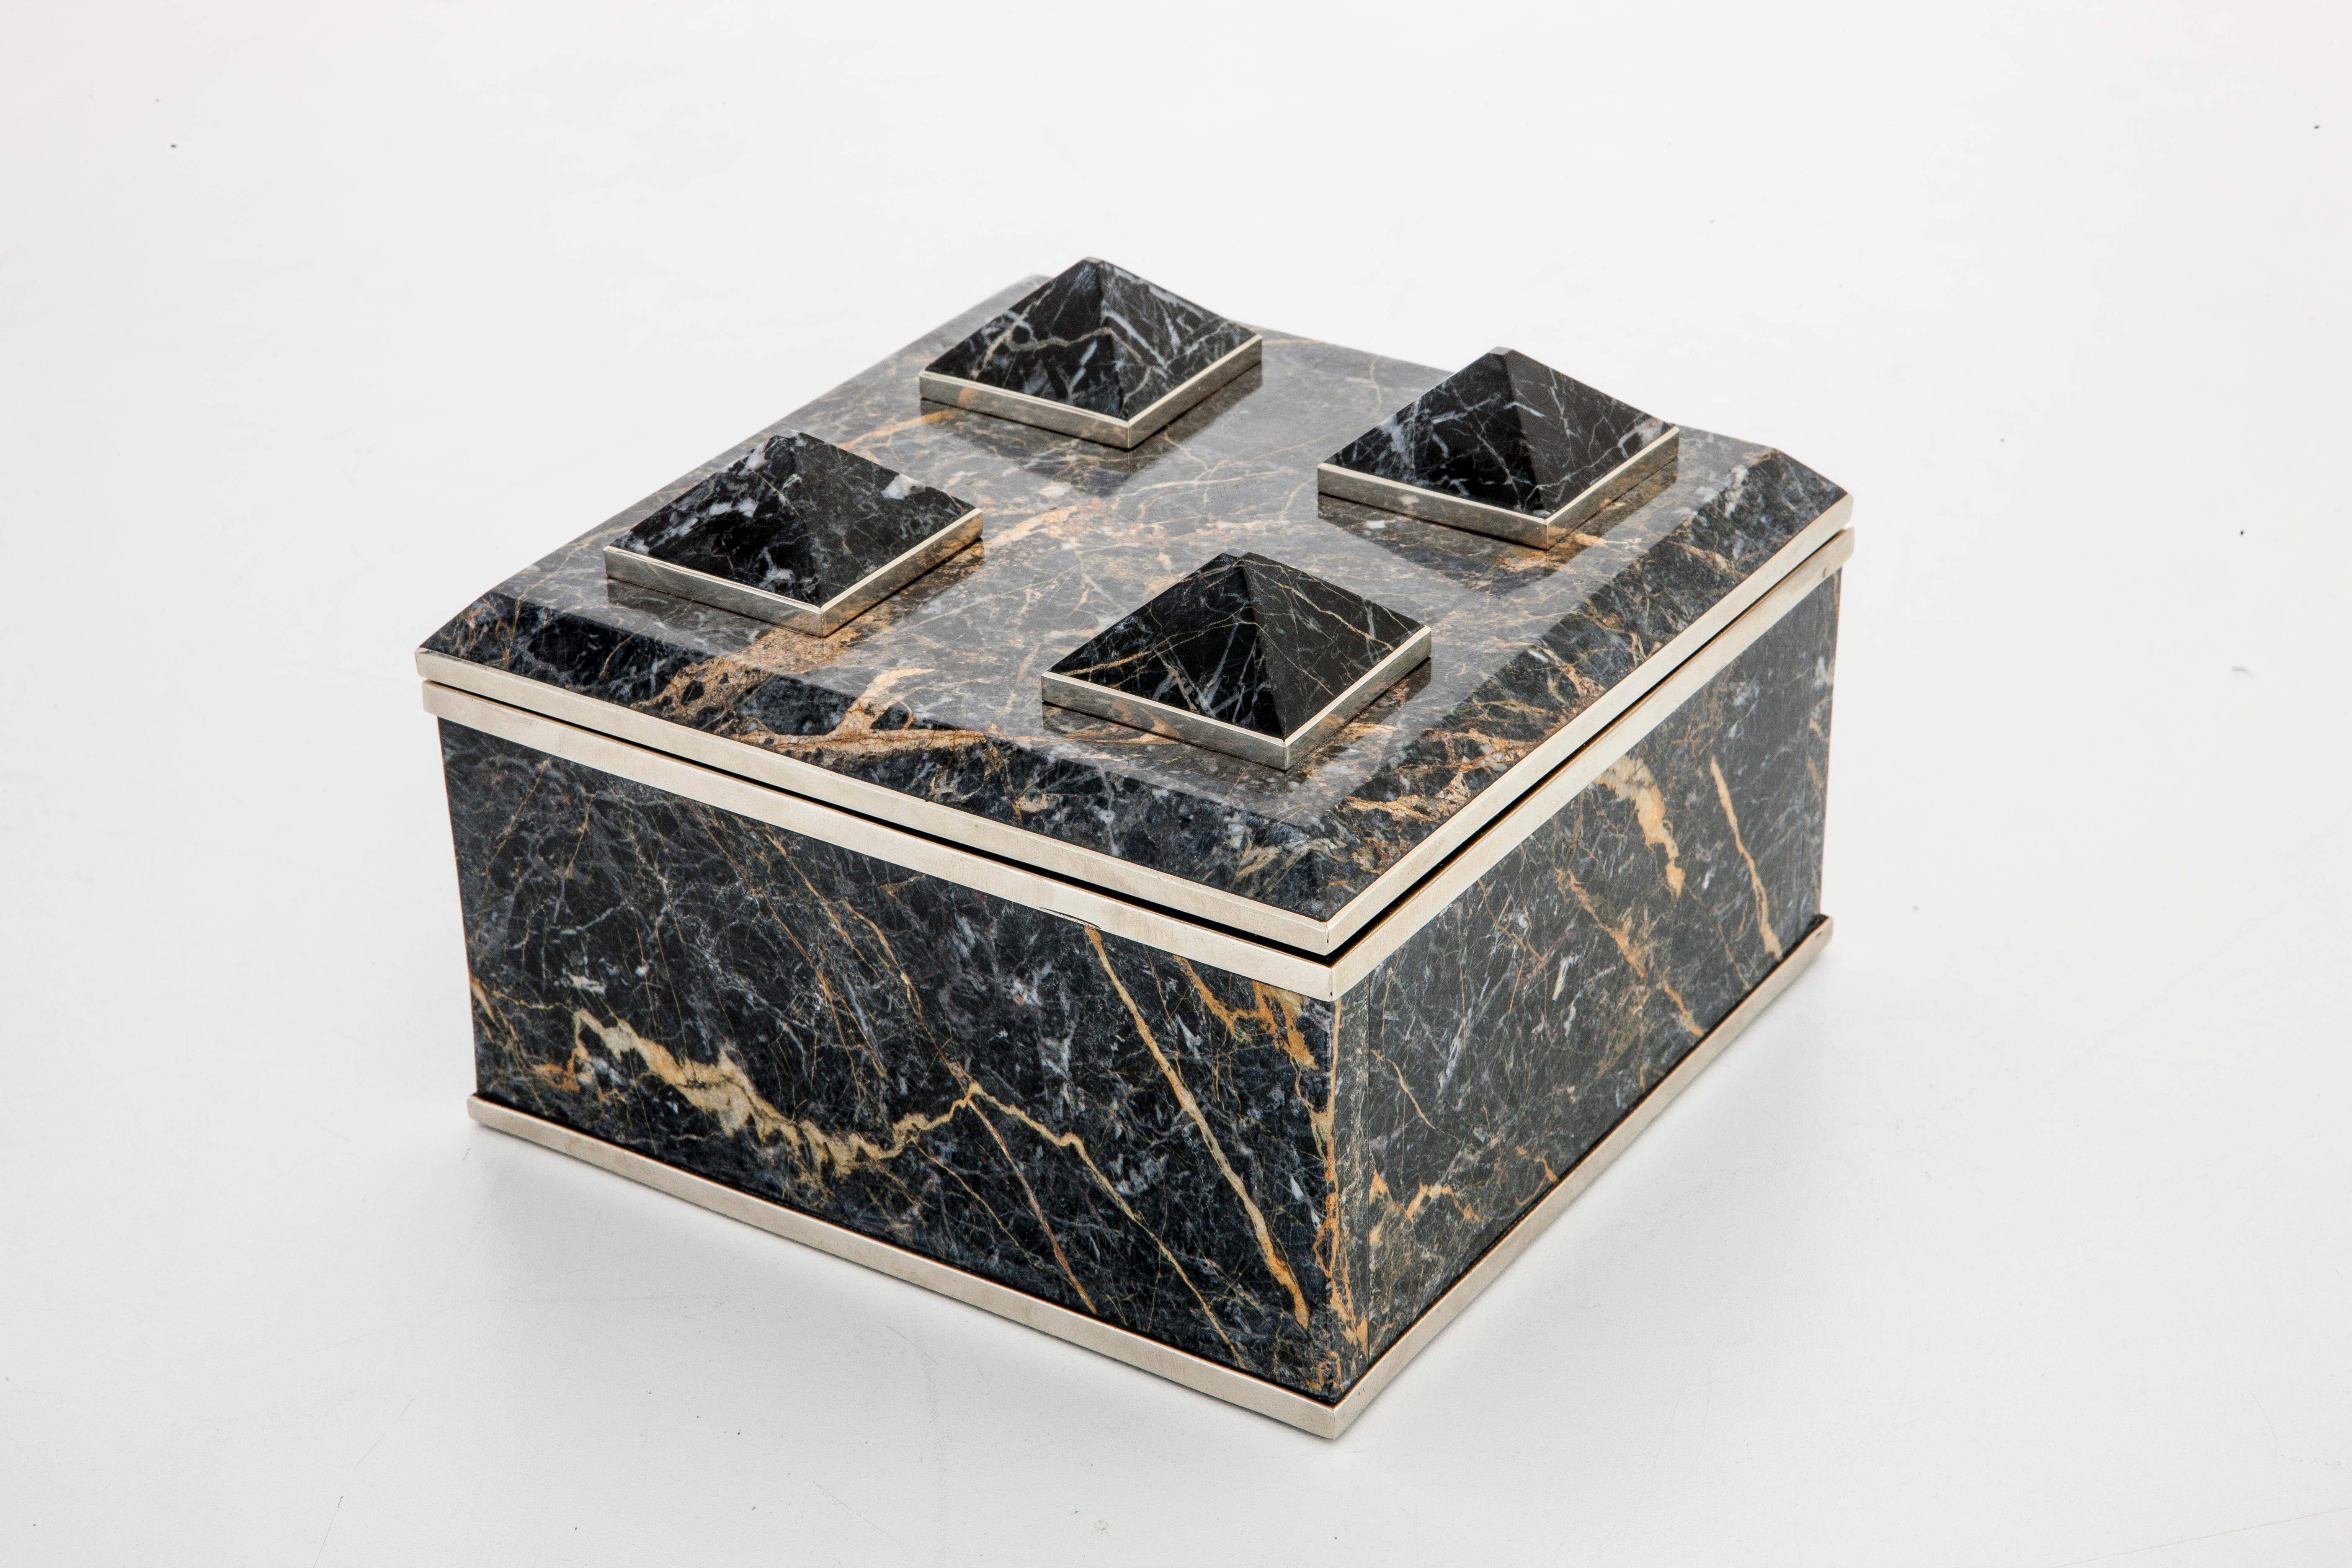 The shape of the inactive Tronador volcano reminded us of the pyramid shaped idea of our boxes that make up this collection. With a rectangular or square base, the box is a reflection of this magnificent inactive mount between Argentina and Chile, a